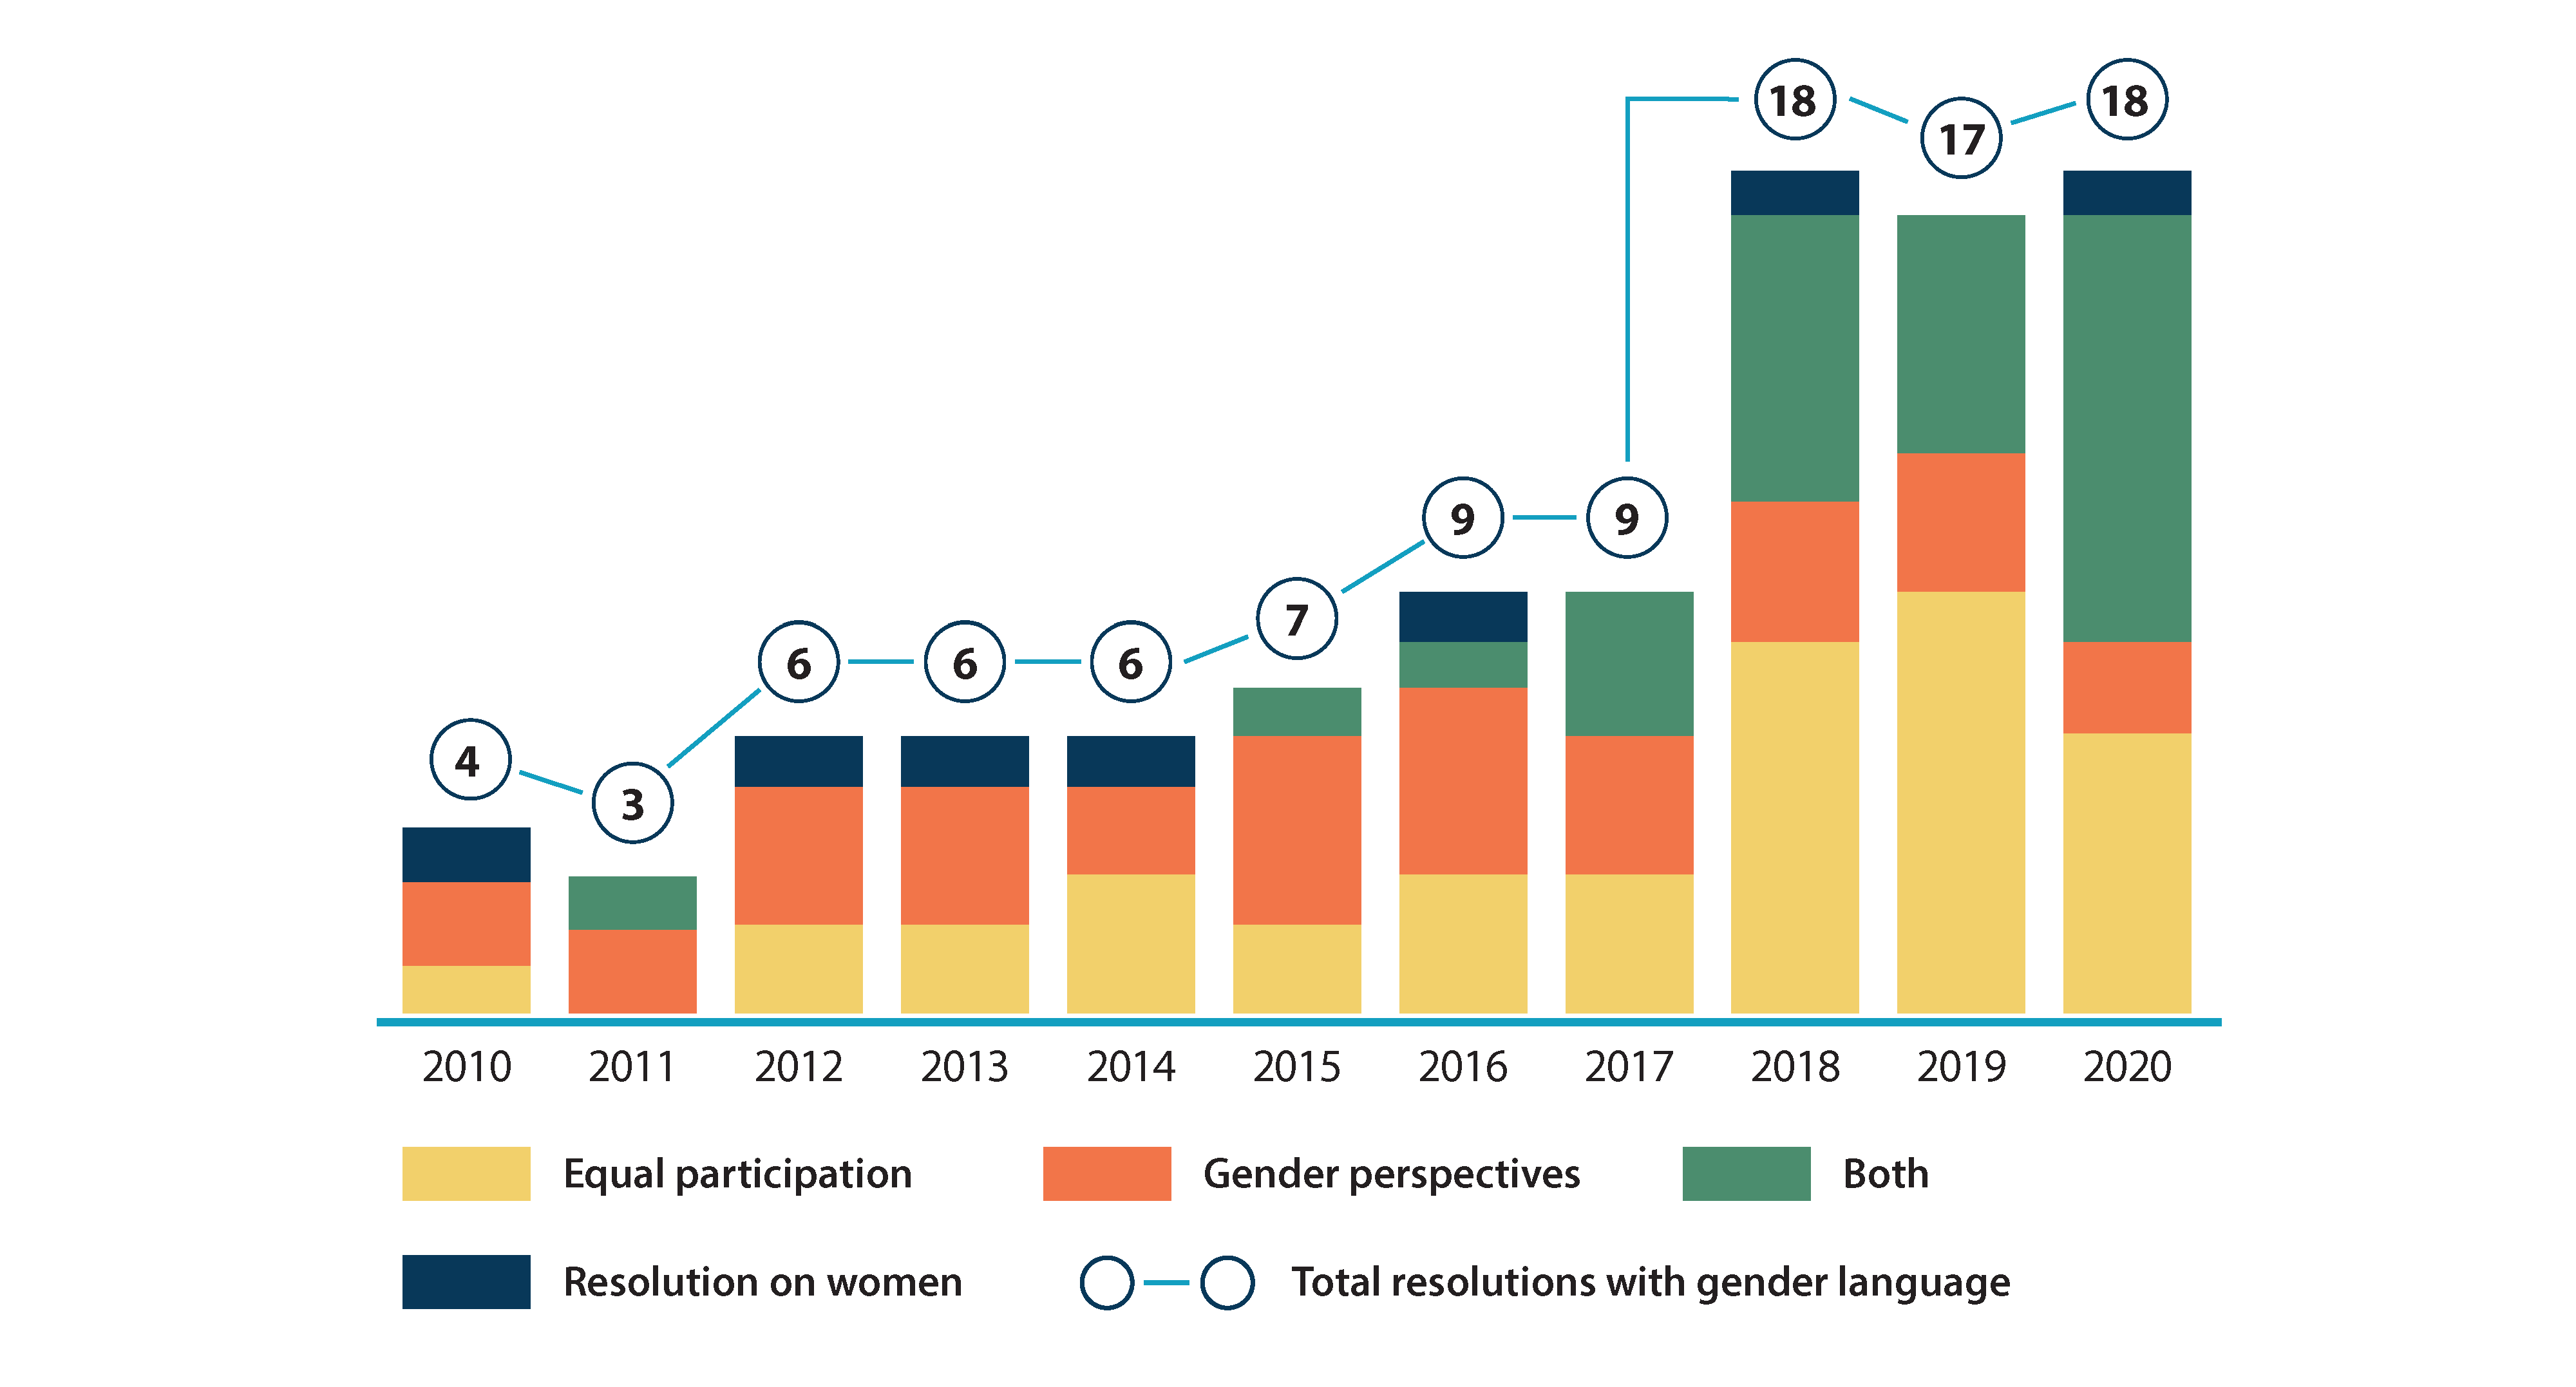 Stacked bar graph showing data from 2010 to 2020 on the total resolutions with gender language, broken down into resolutions with references to equal participation or gender perspectives and both these concepts.